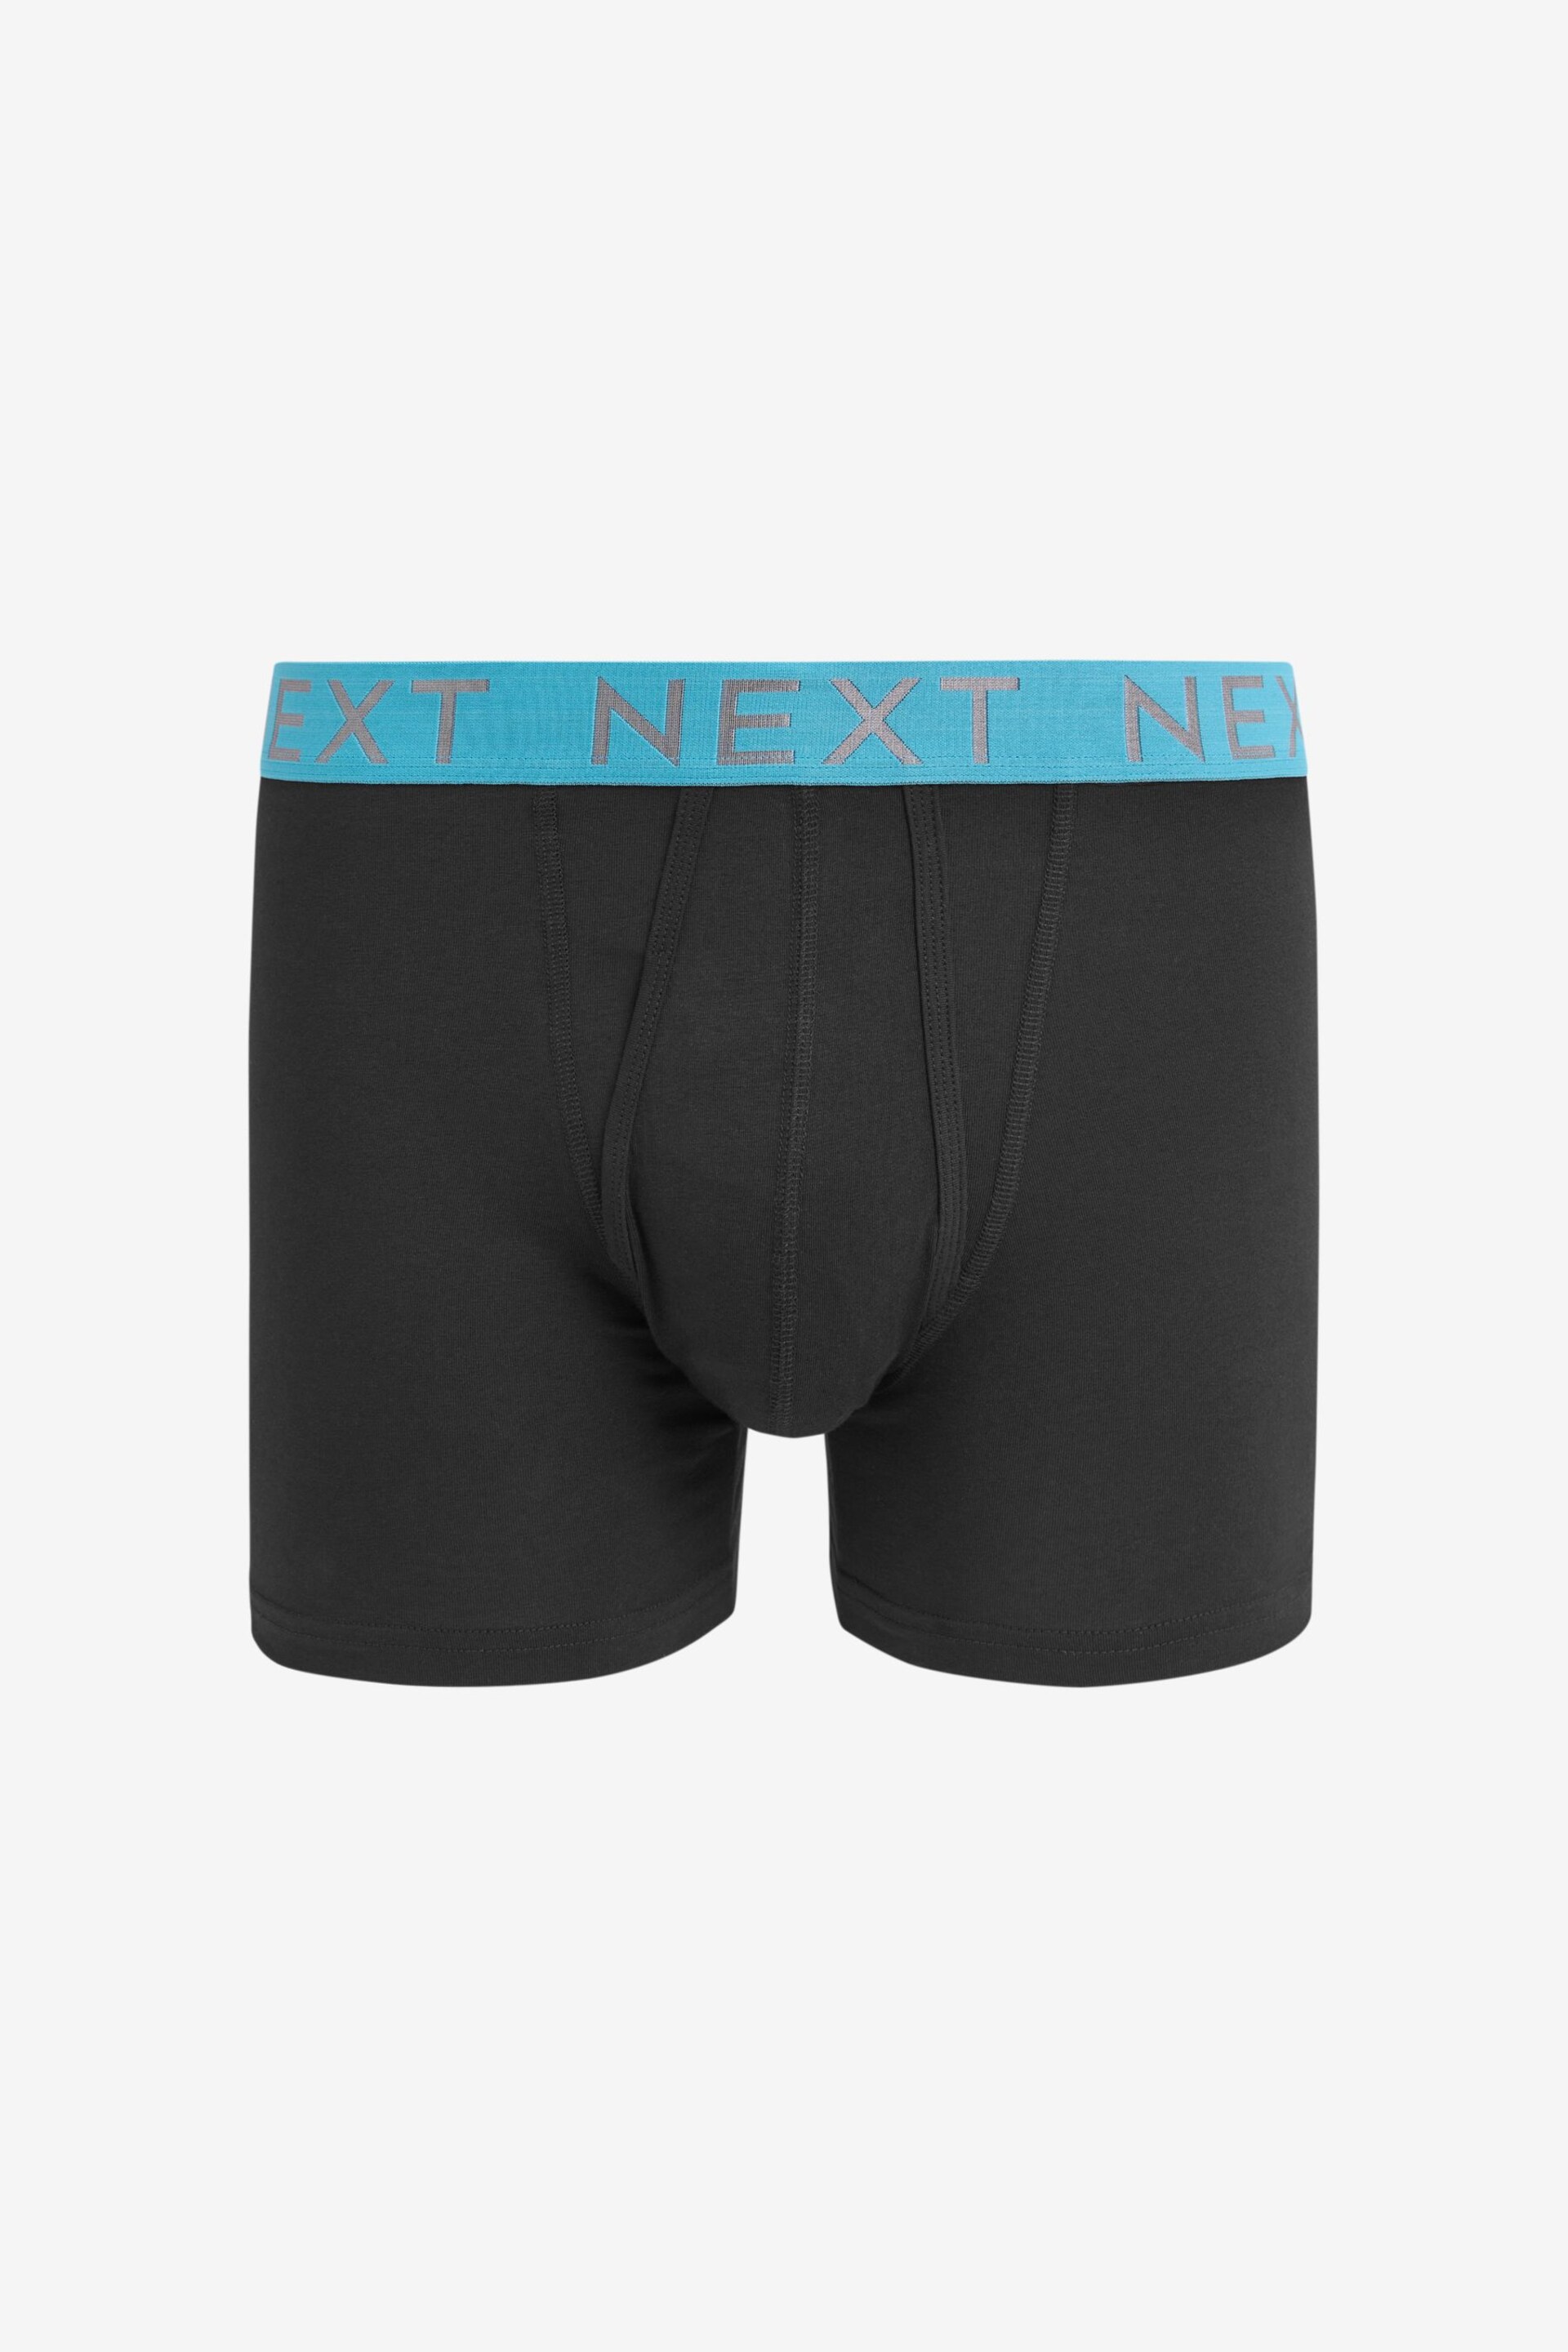 Black Bright Waistband A-Front Boxers 8 Pack - Image 7 of 13